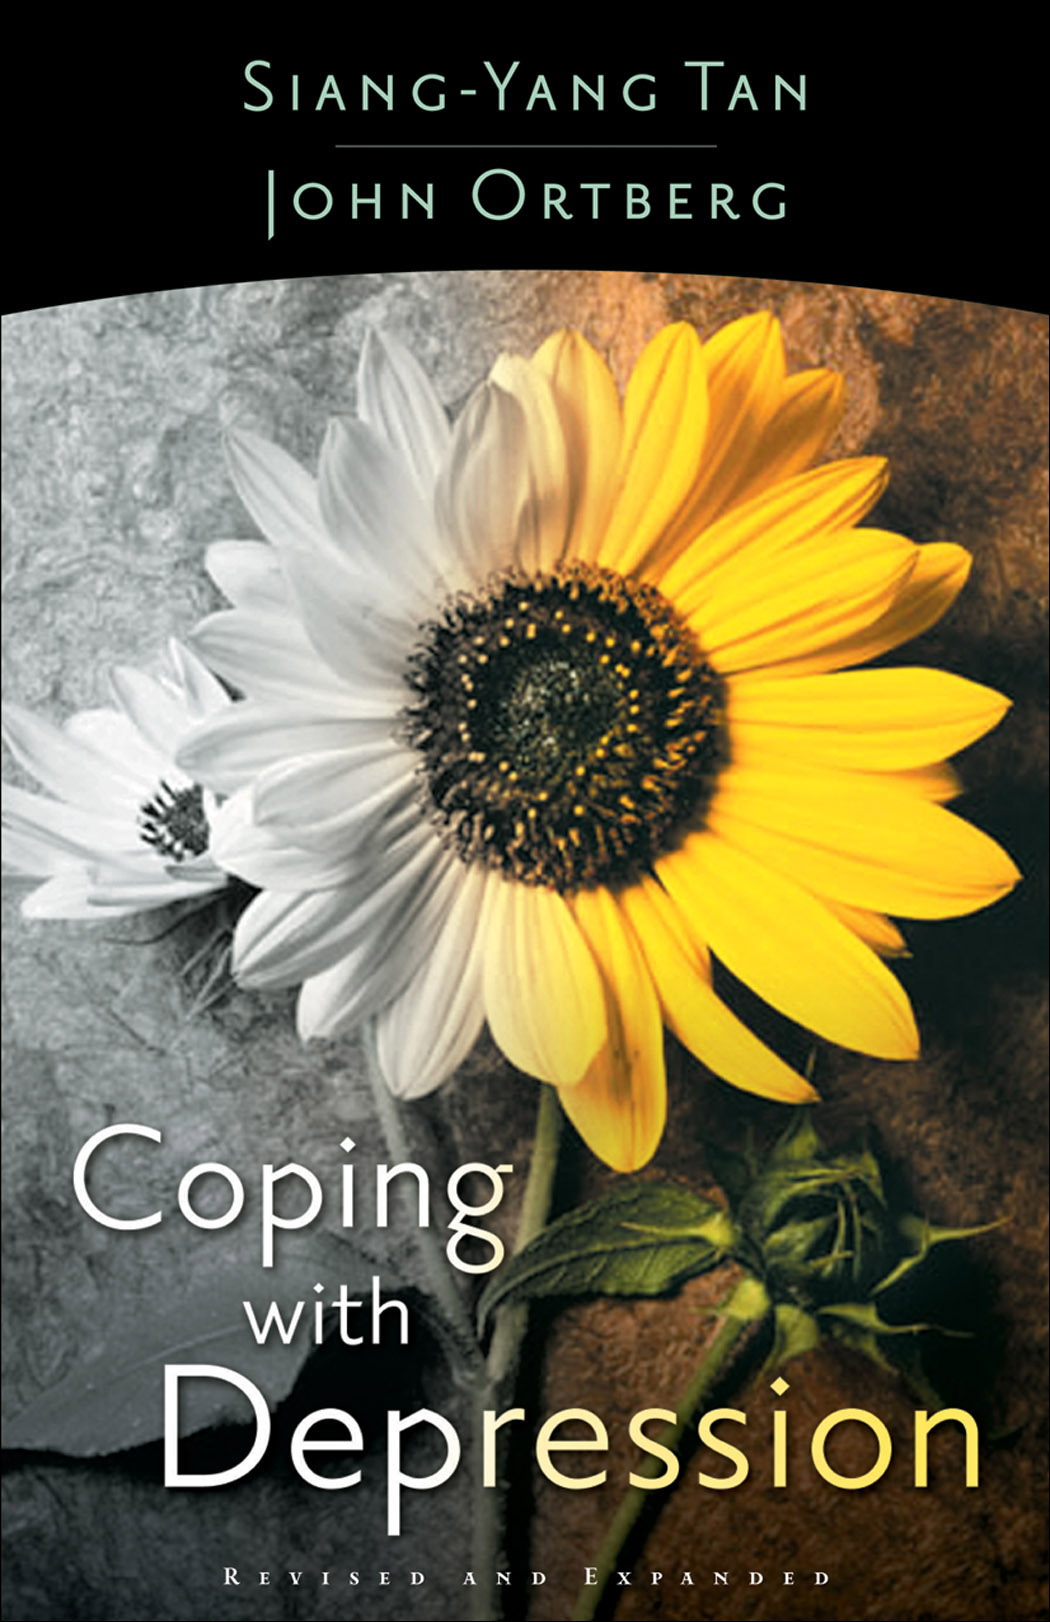 Coping with Depression [eBook]